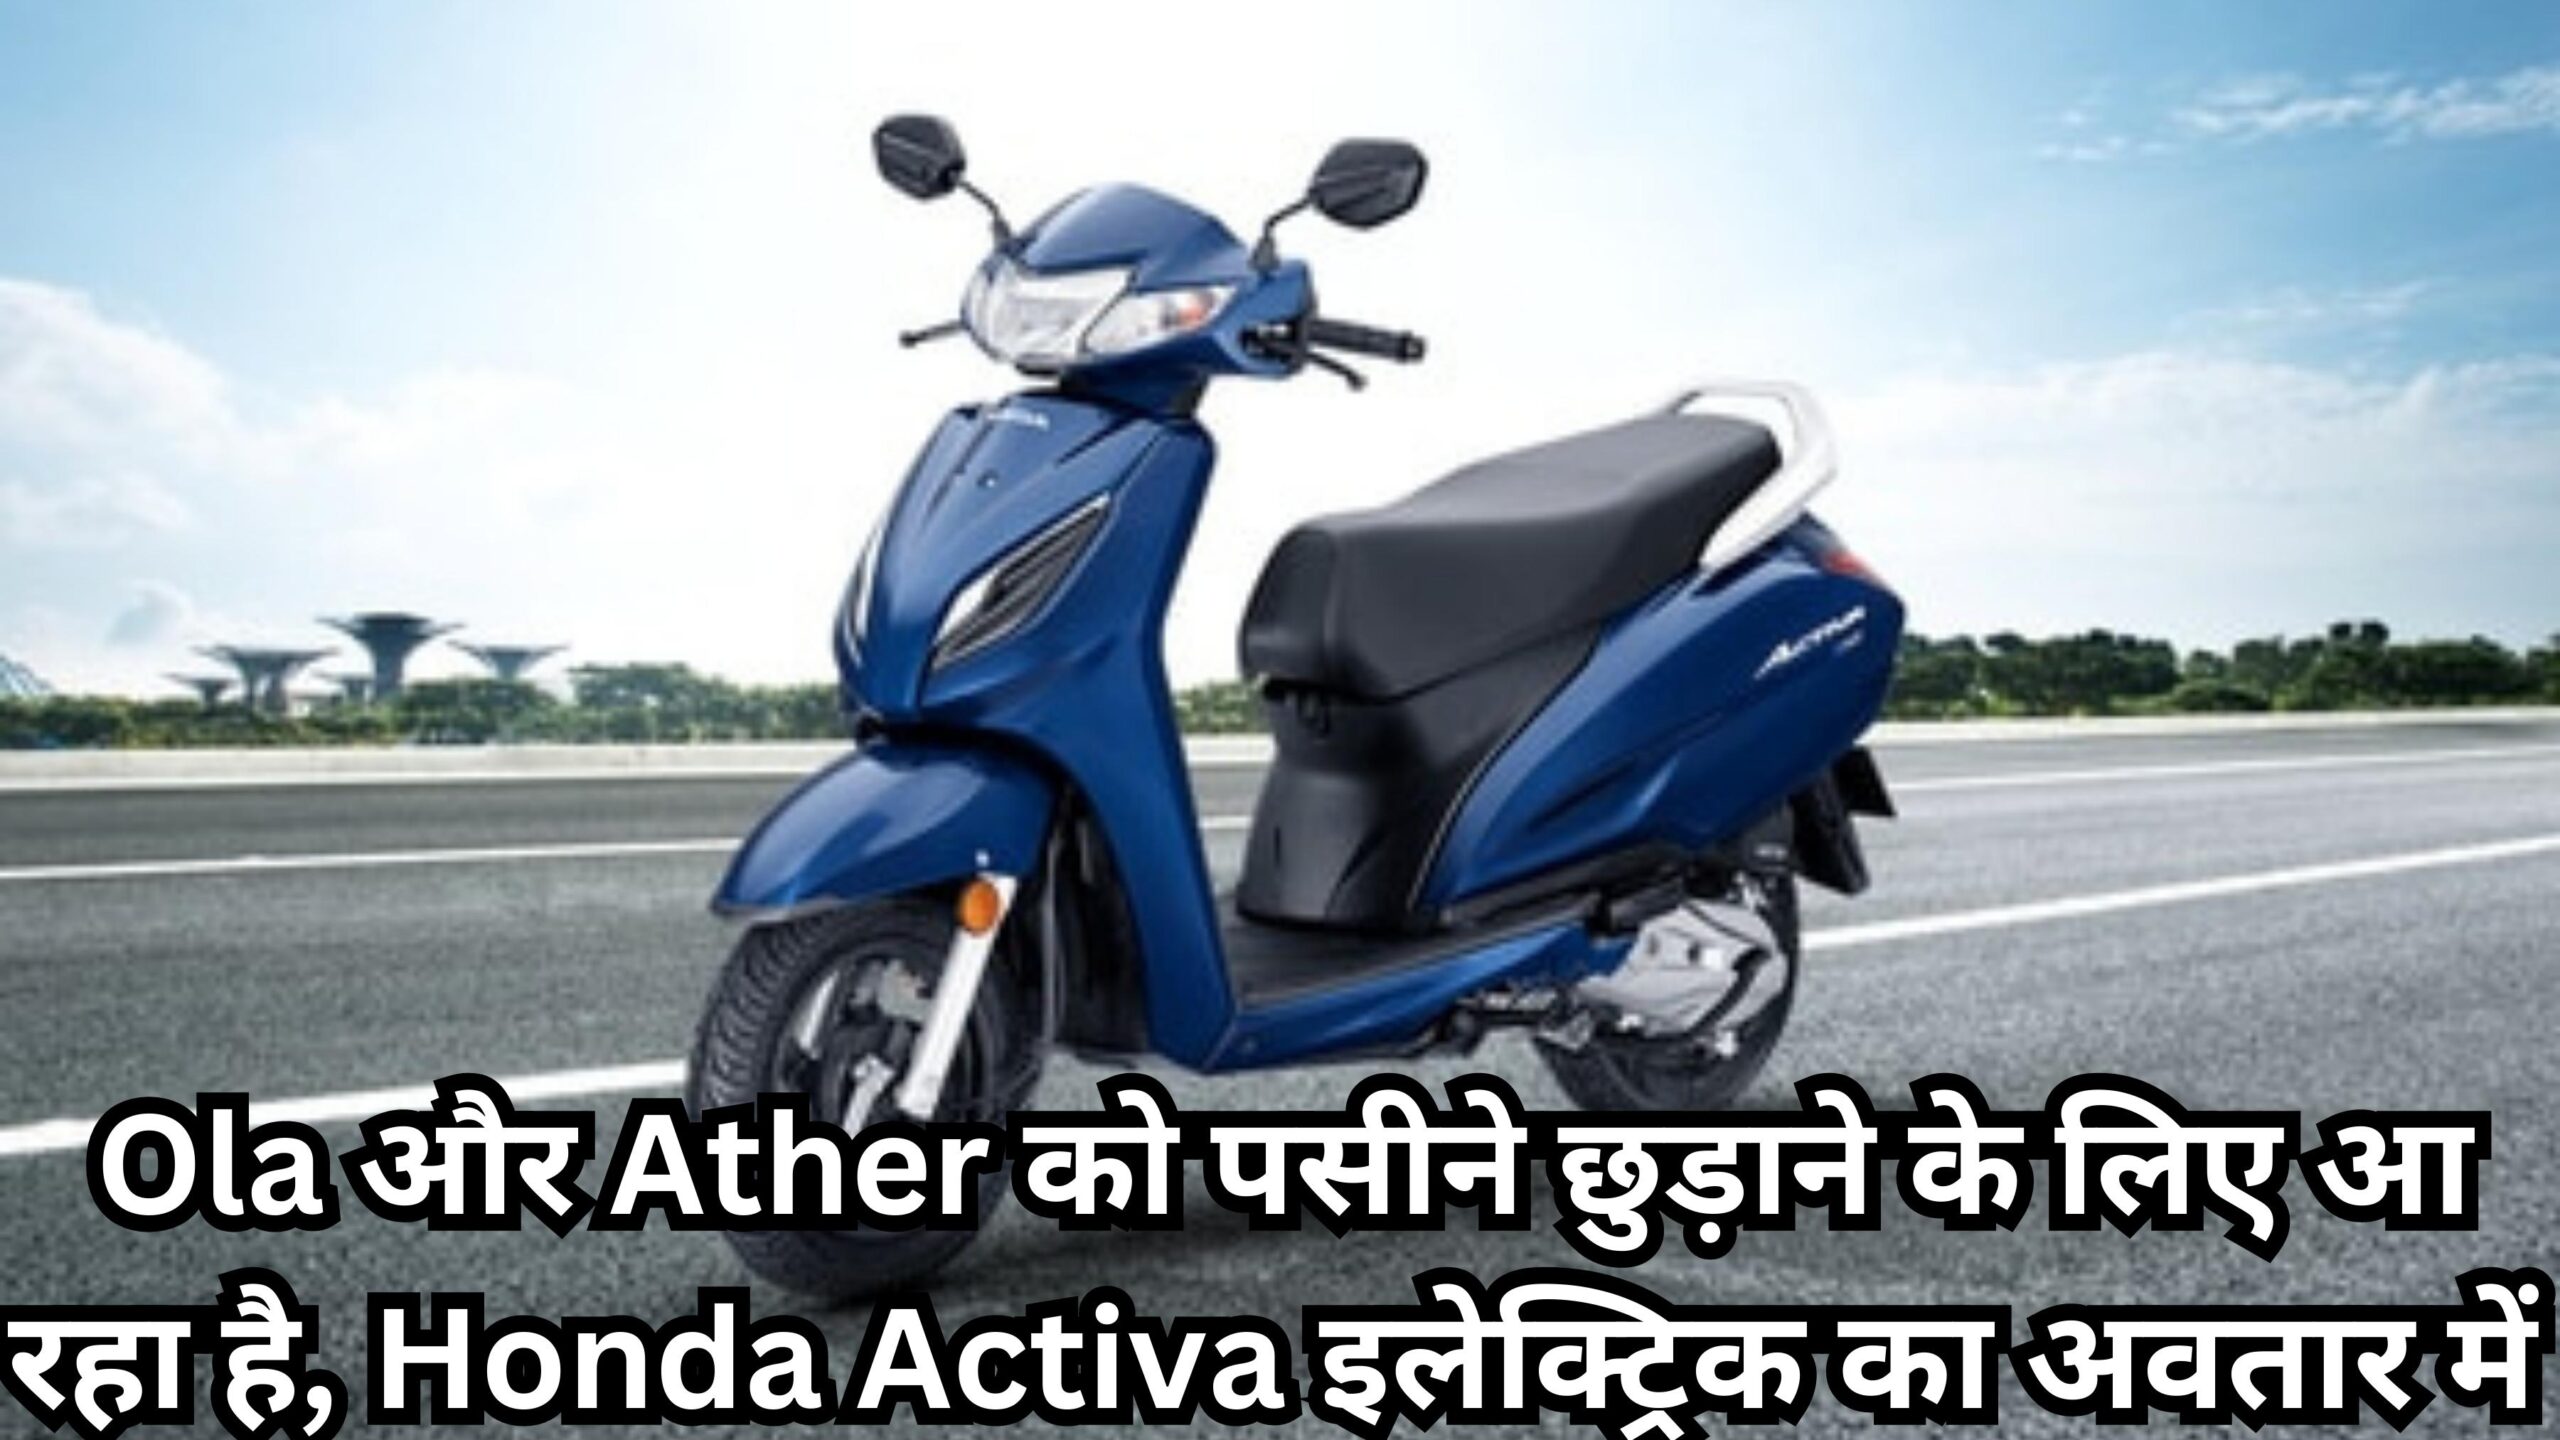 Coming to make Ola and Ather sweat, Honda Activa in an electric avatar